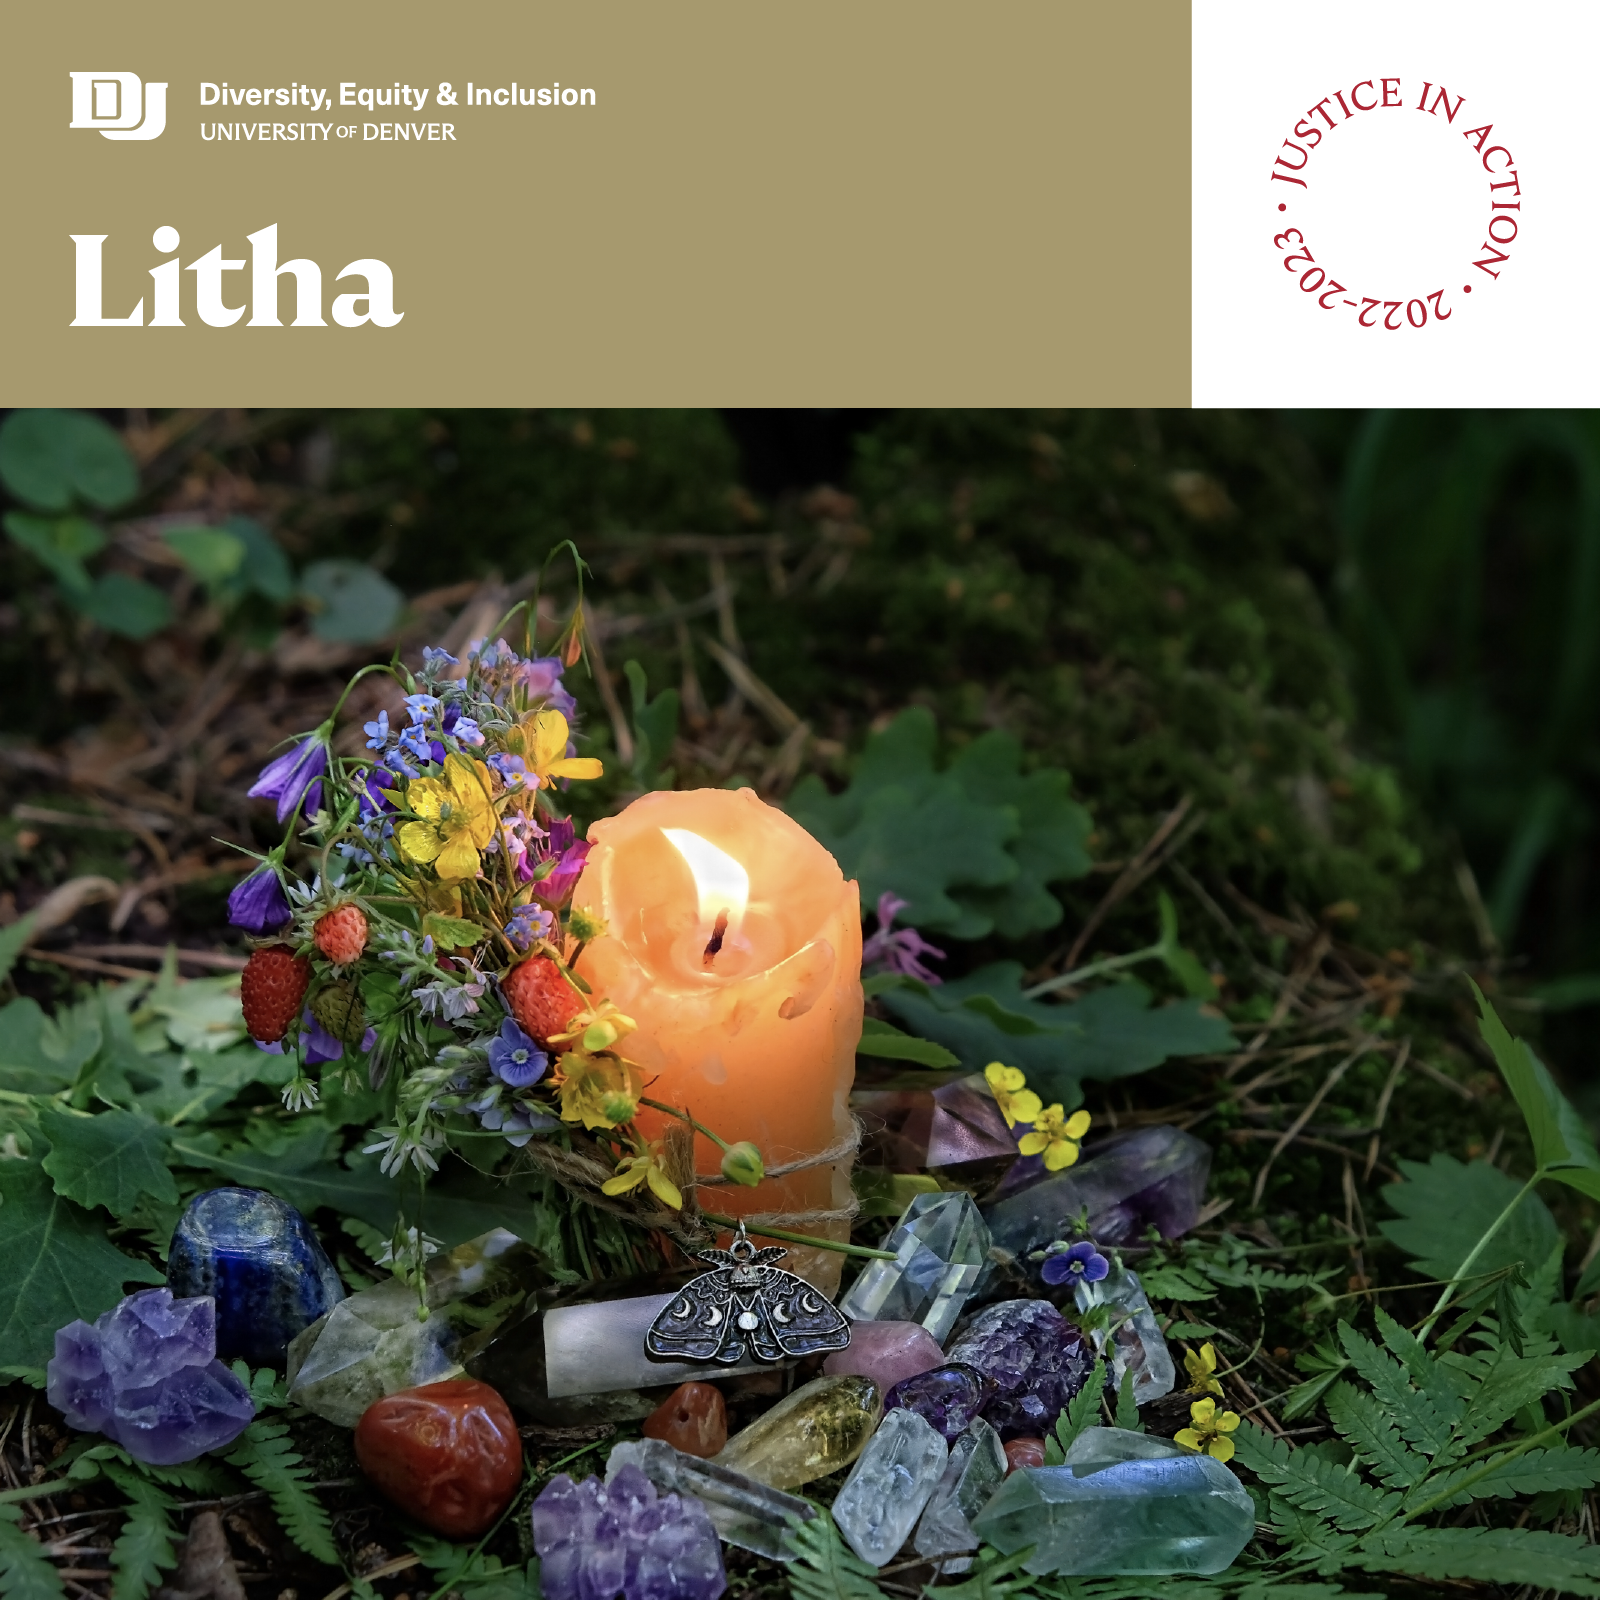 Lithia Graphic; a forest scene with wild flowers, a lit candle, and a moth pendant